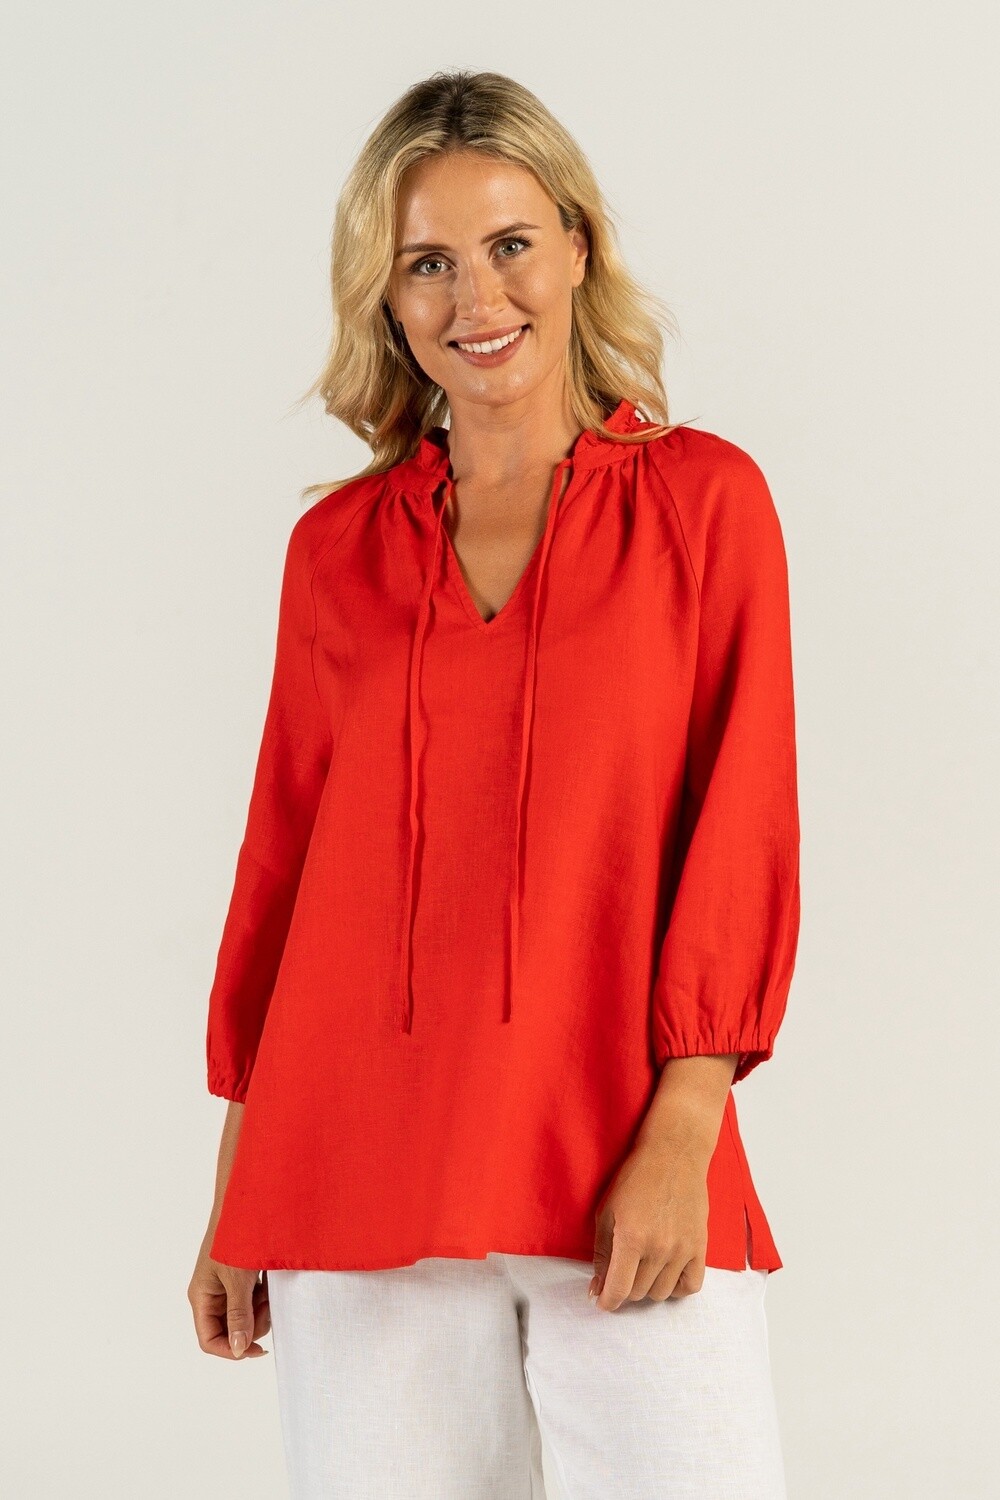 See Saw linen Ruffle Tunic Top Red, Size: 12